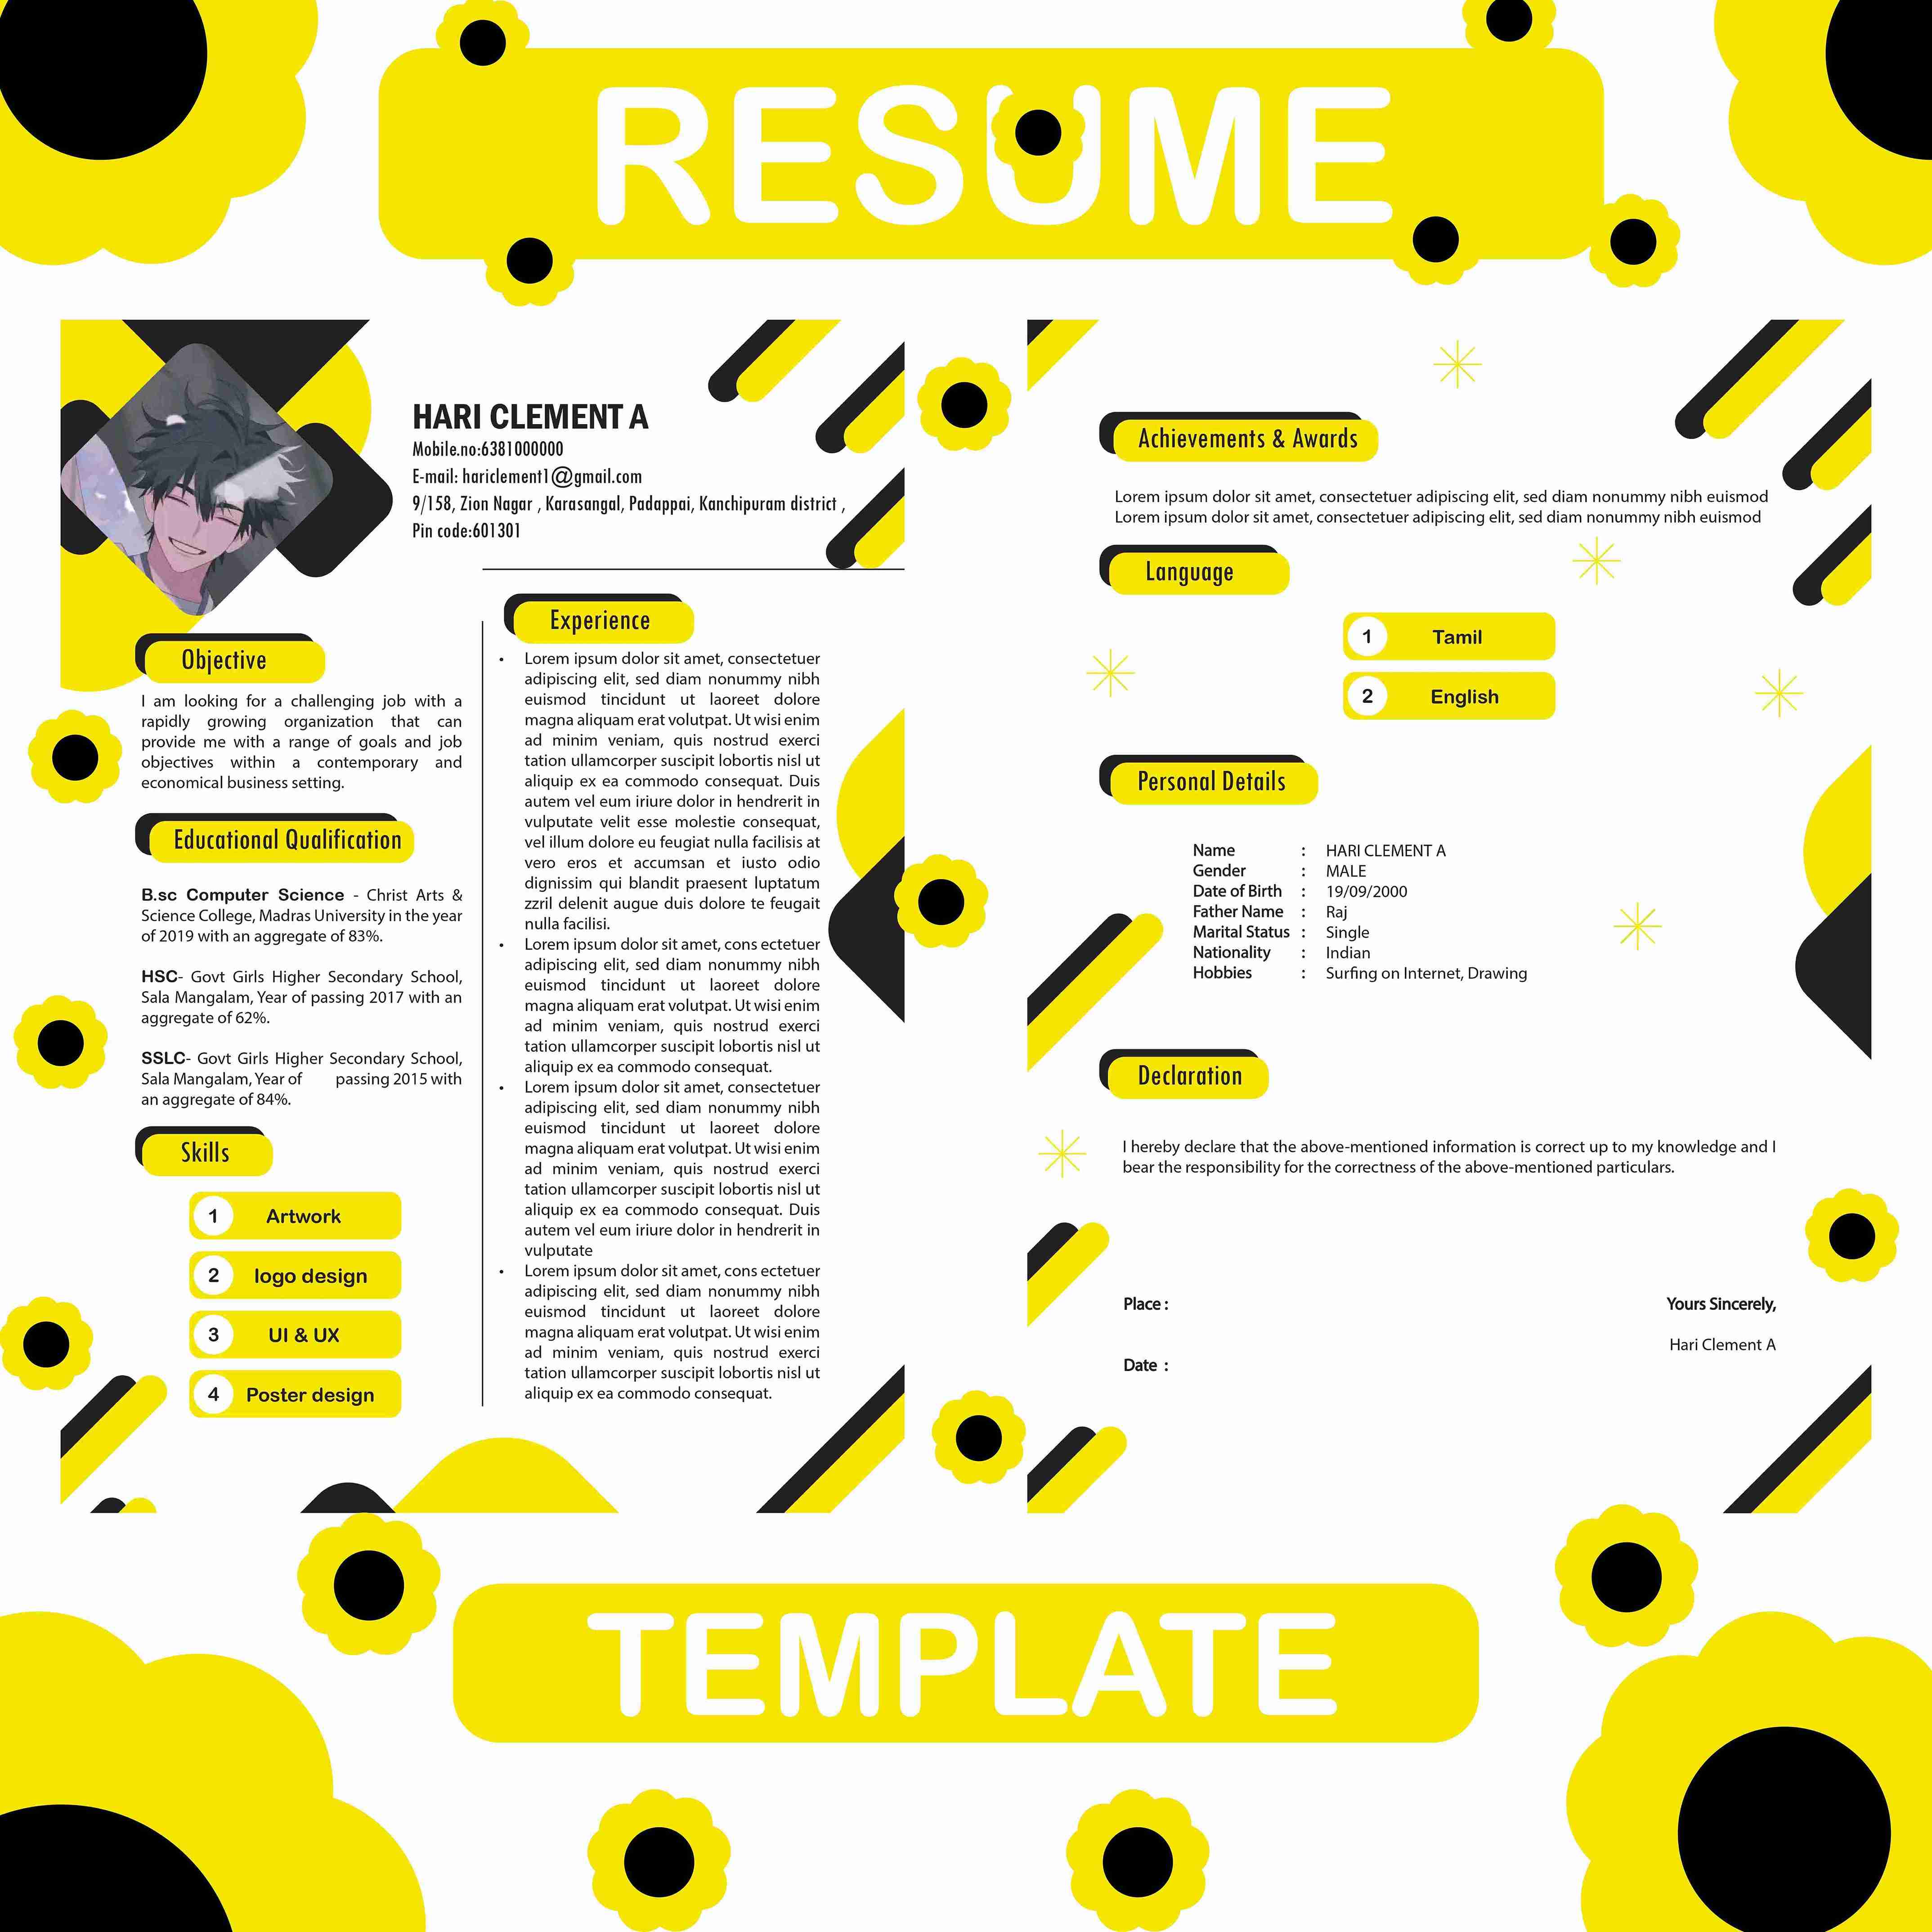 RESUME TEMPLATE preview image.